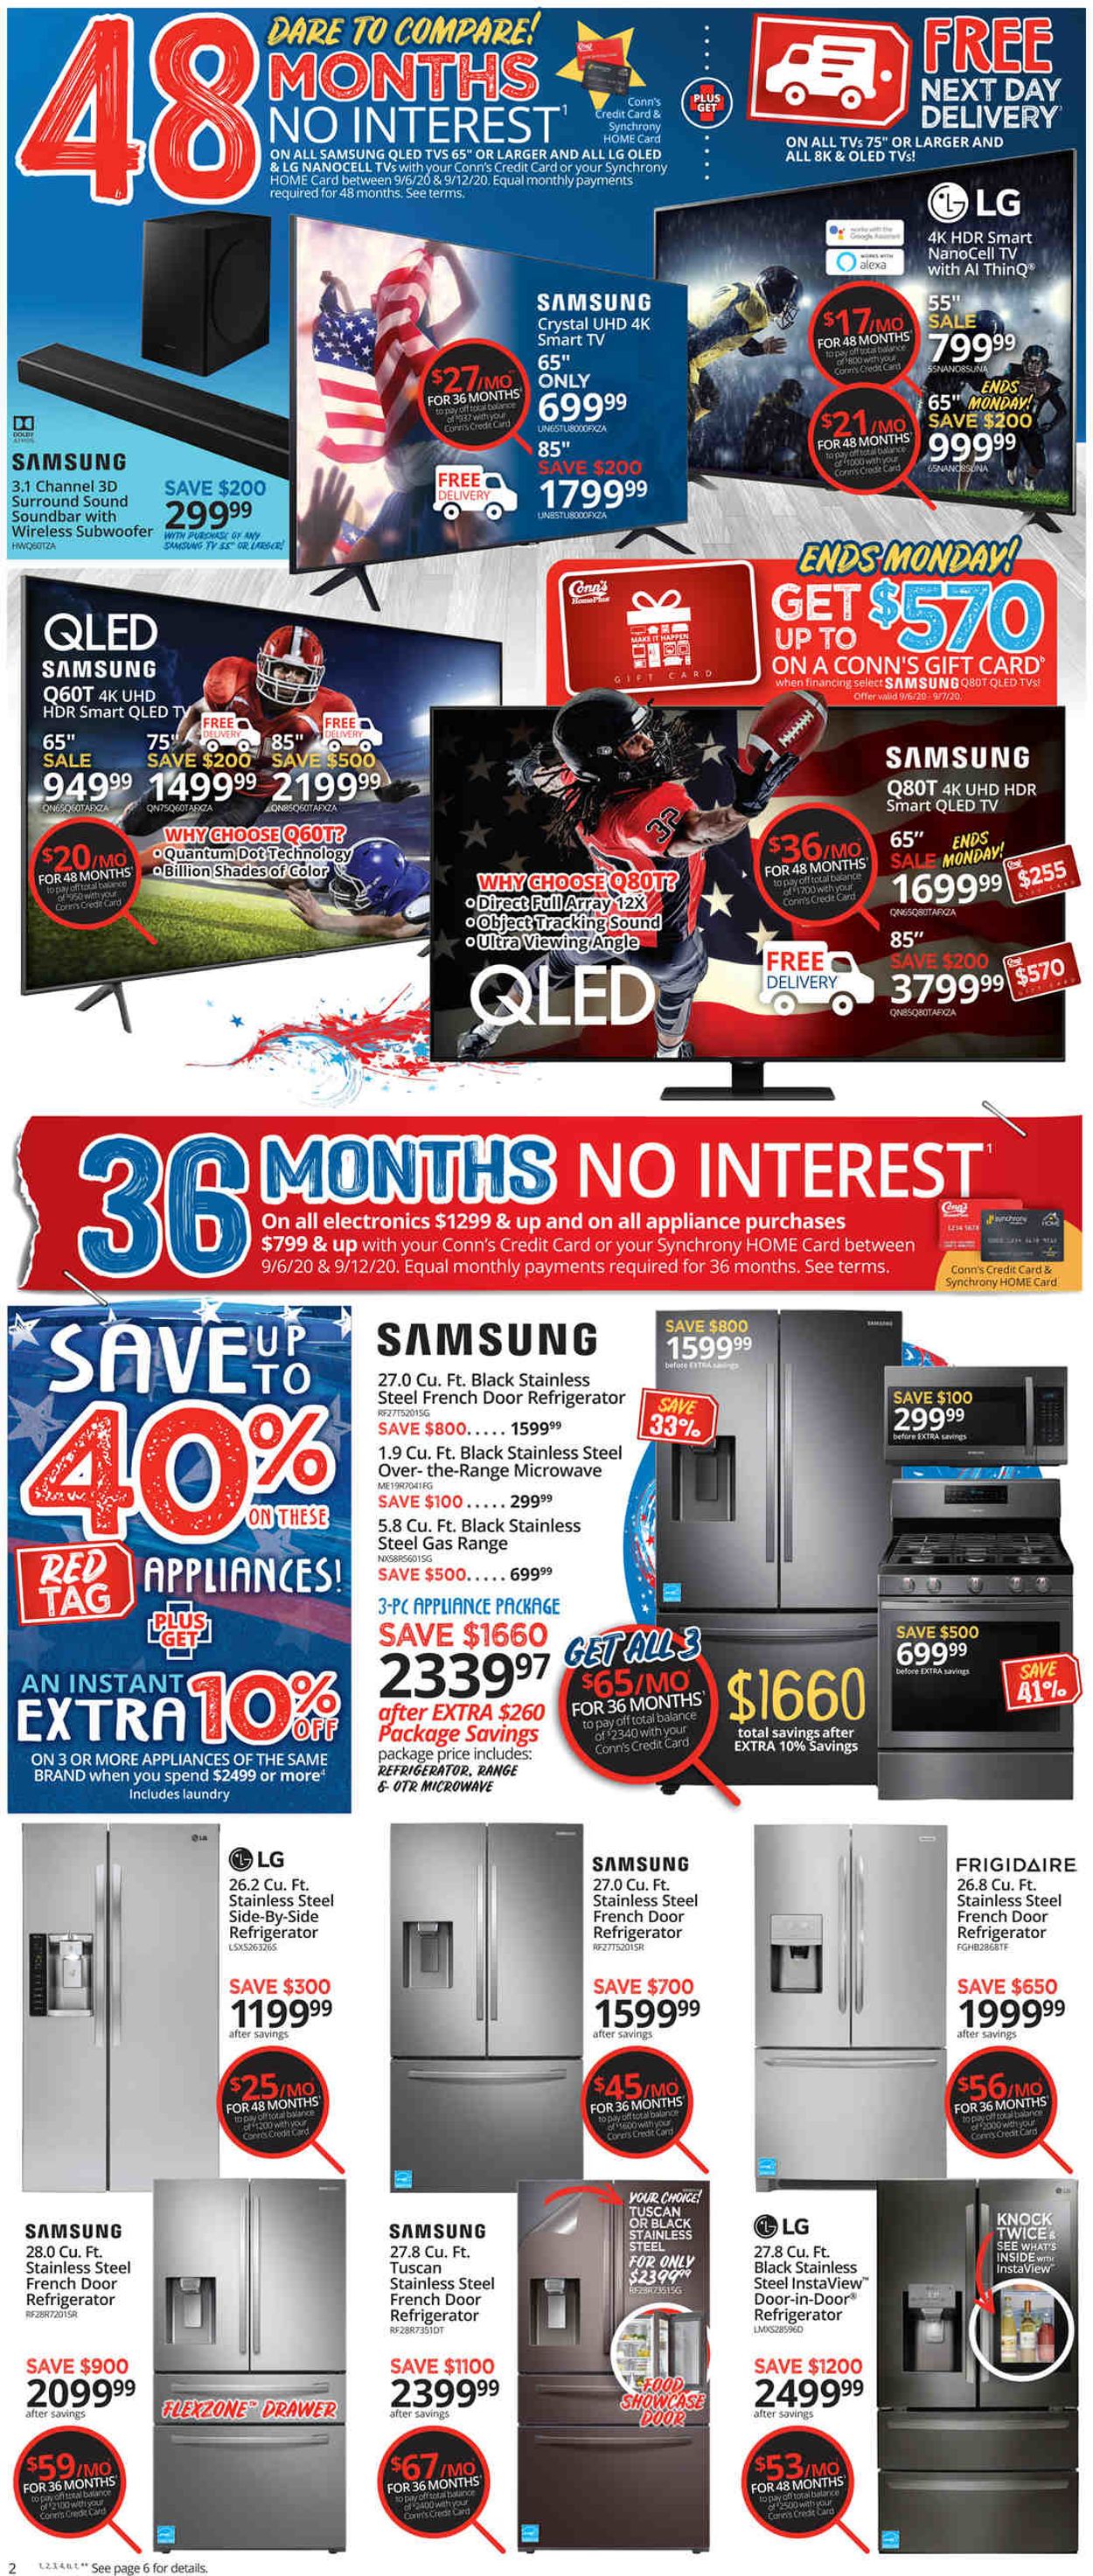 Conn's Home Plus Weekly Ad Circular - valid 09/06-09/12/2020 (Page 2)